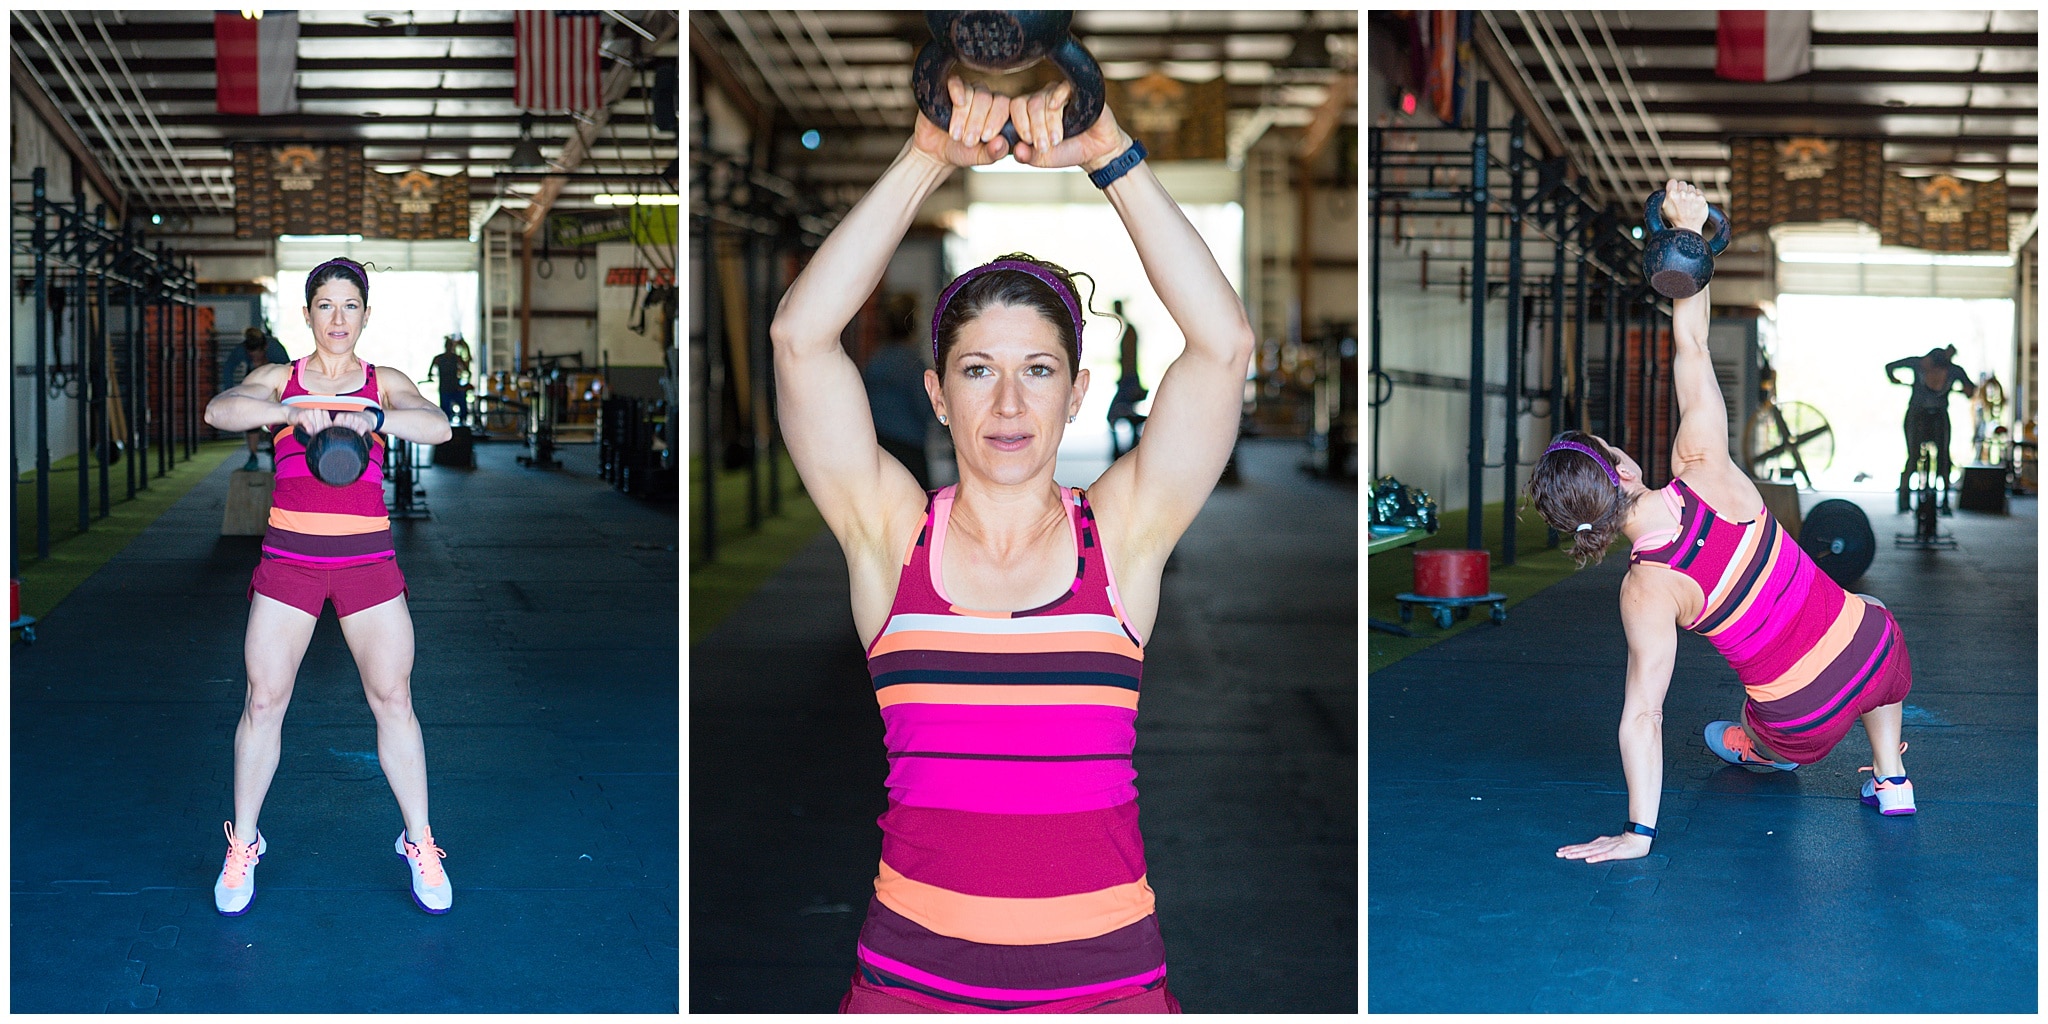 nutritionist from Focused and Fit Nutrition working out at Pearland Crossfit captured by Swish and Click Photography